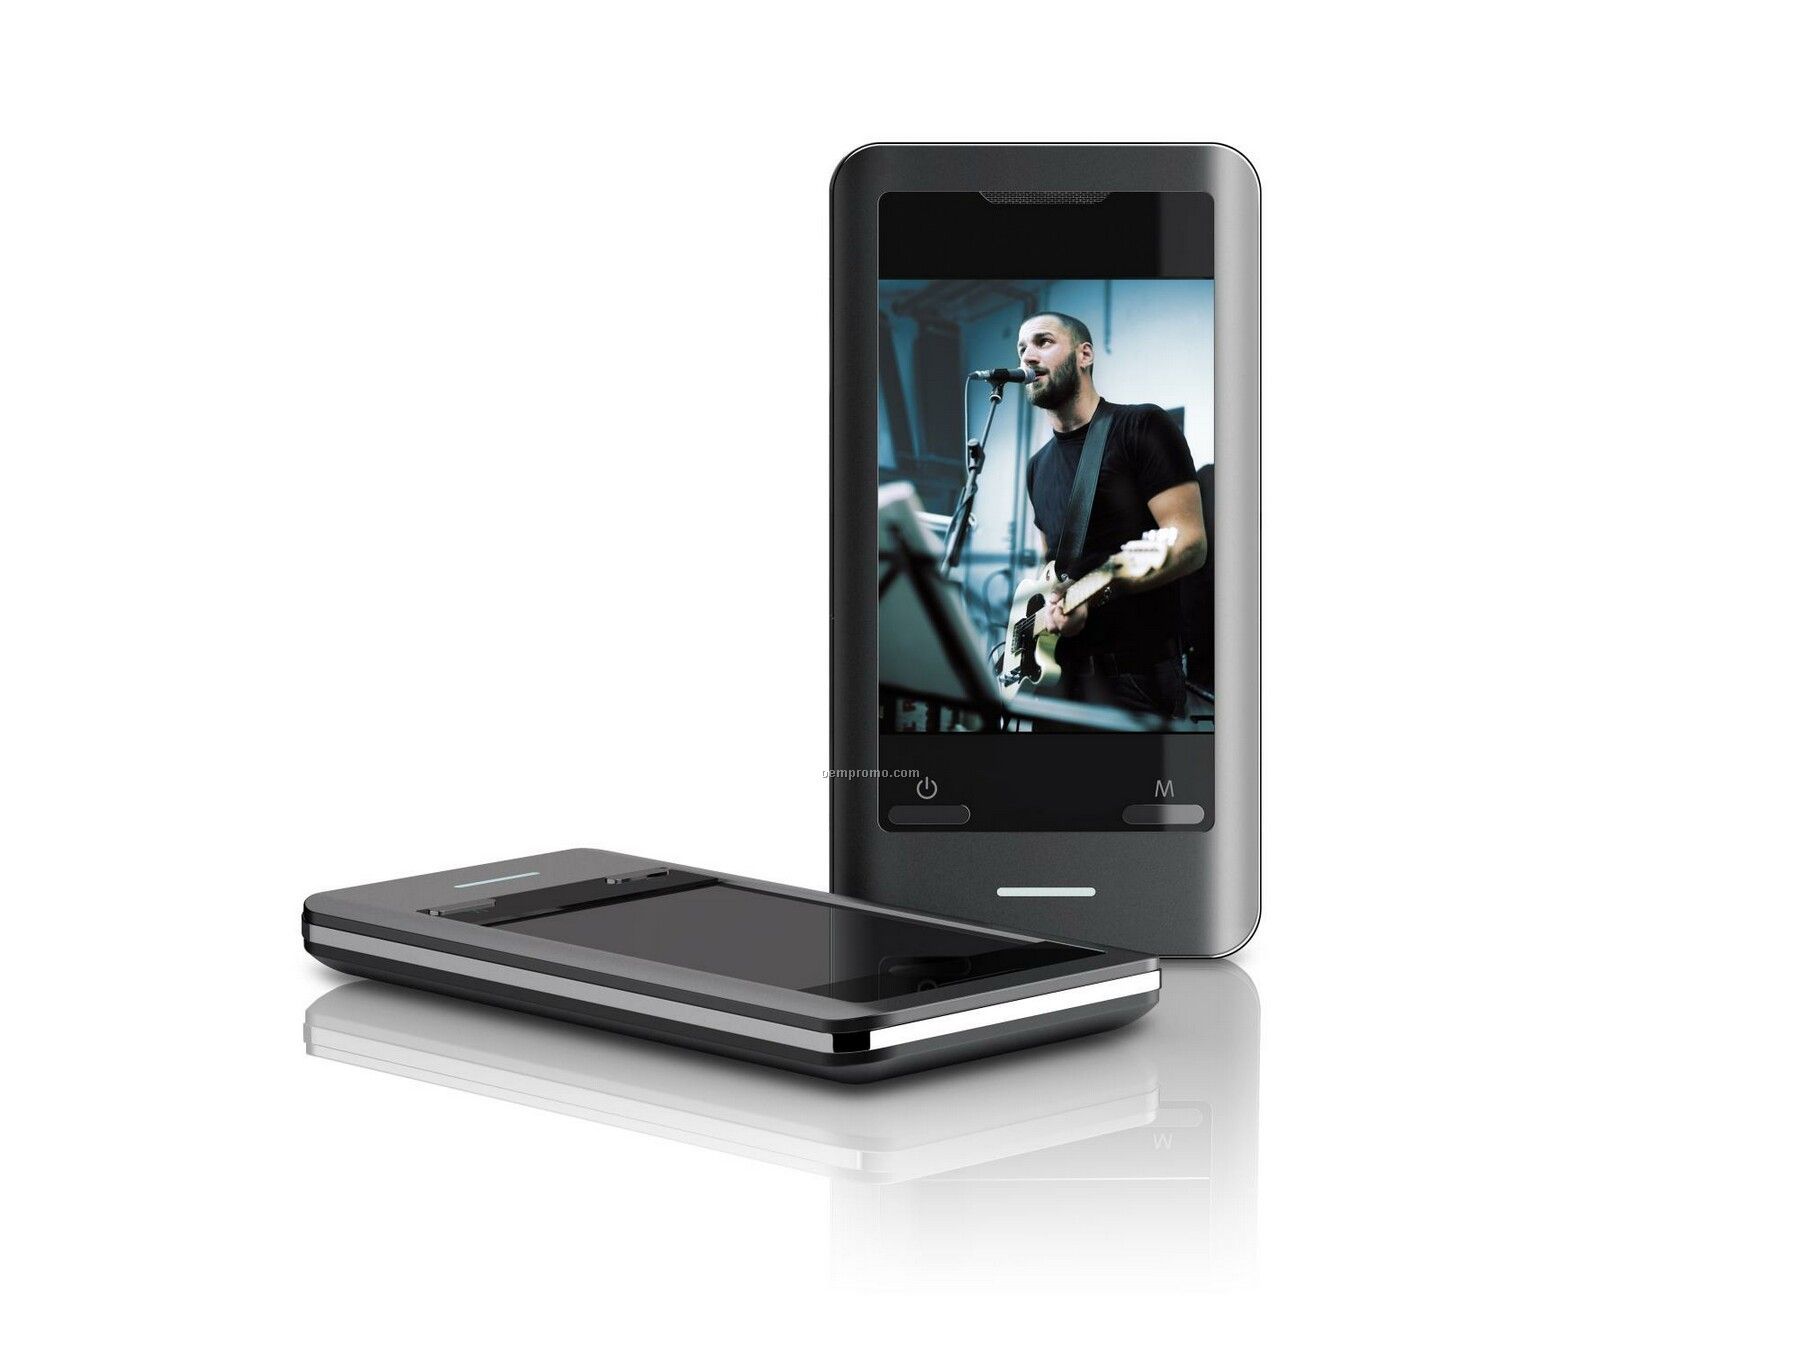   Player  Speaker on Mp3 Player With Speaker China Wholesale 2 8  Touchscreen Video Mp3